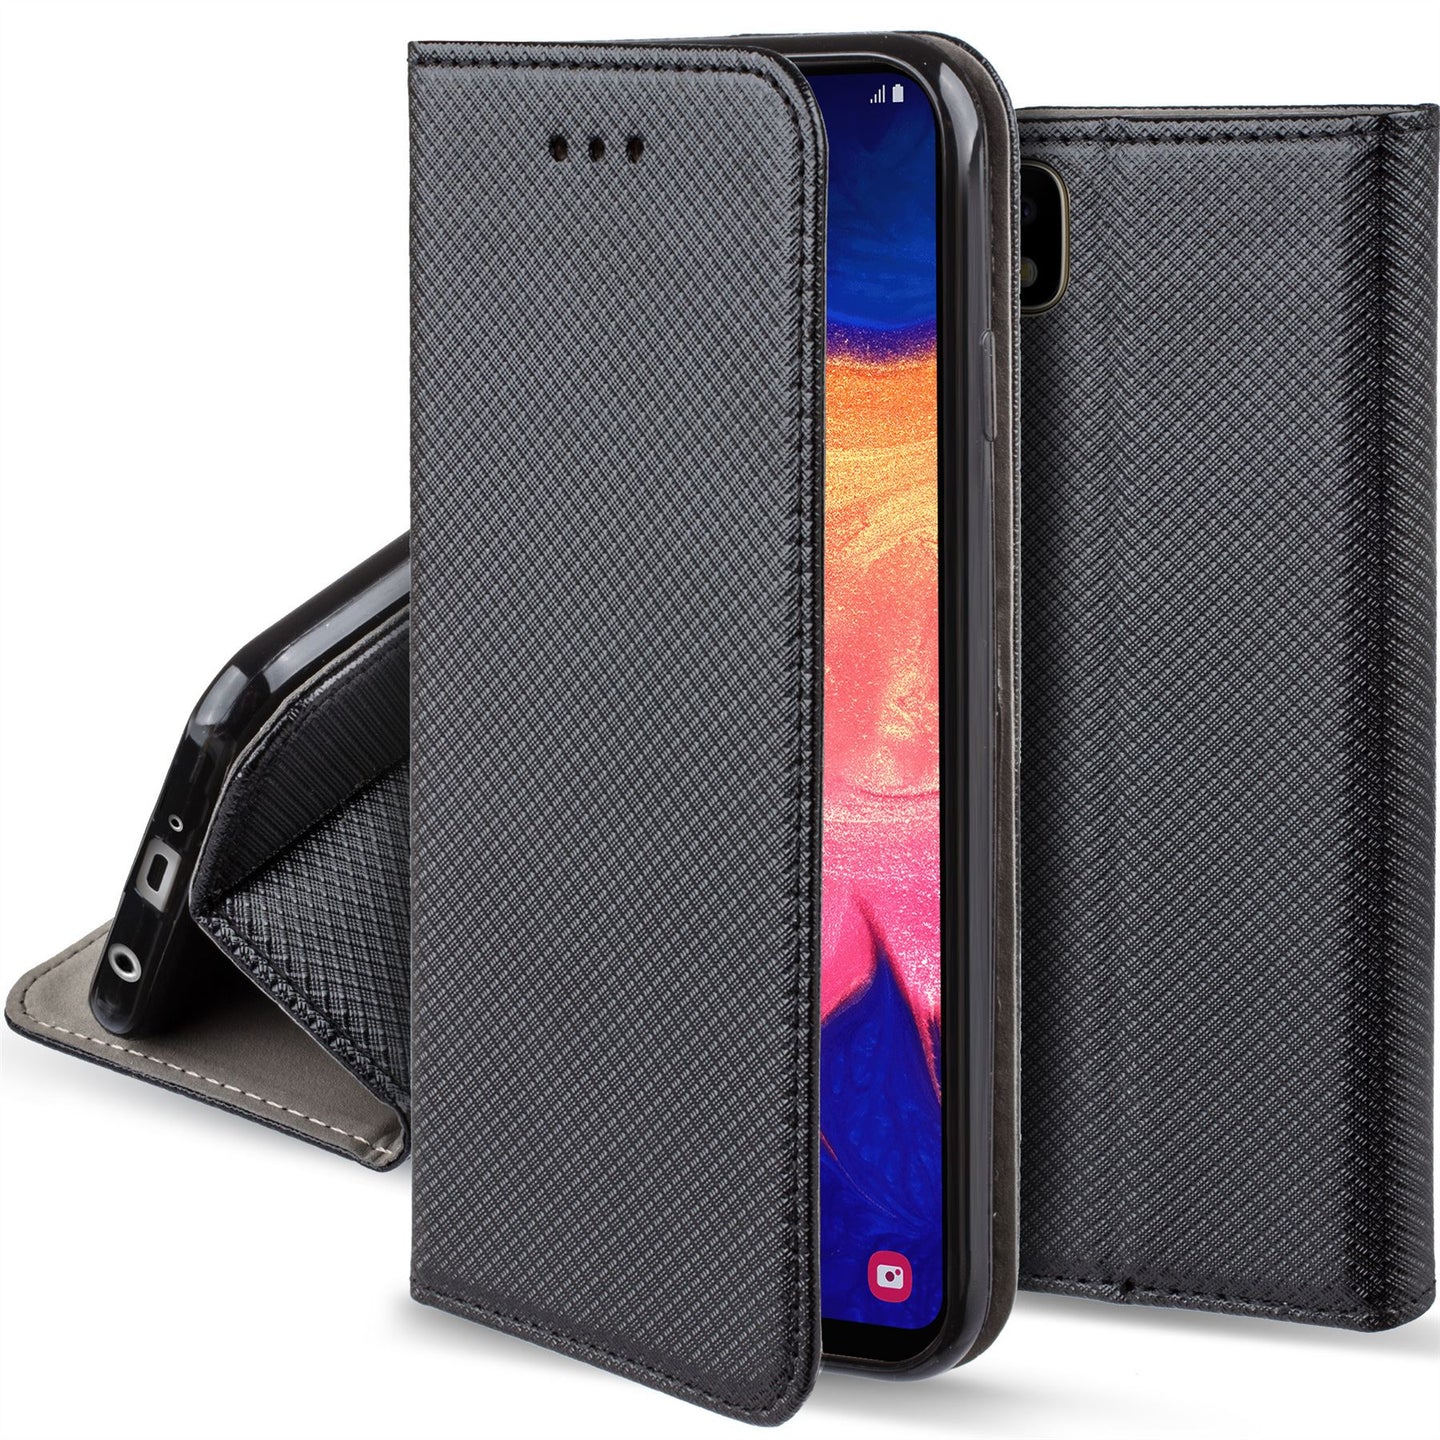 Moozy Case Flip Cover for Samsung A10, Black - Smart Magnetic Flip Case with Card Holder and Stand